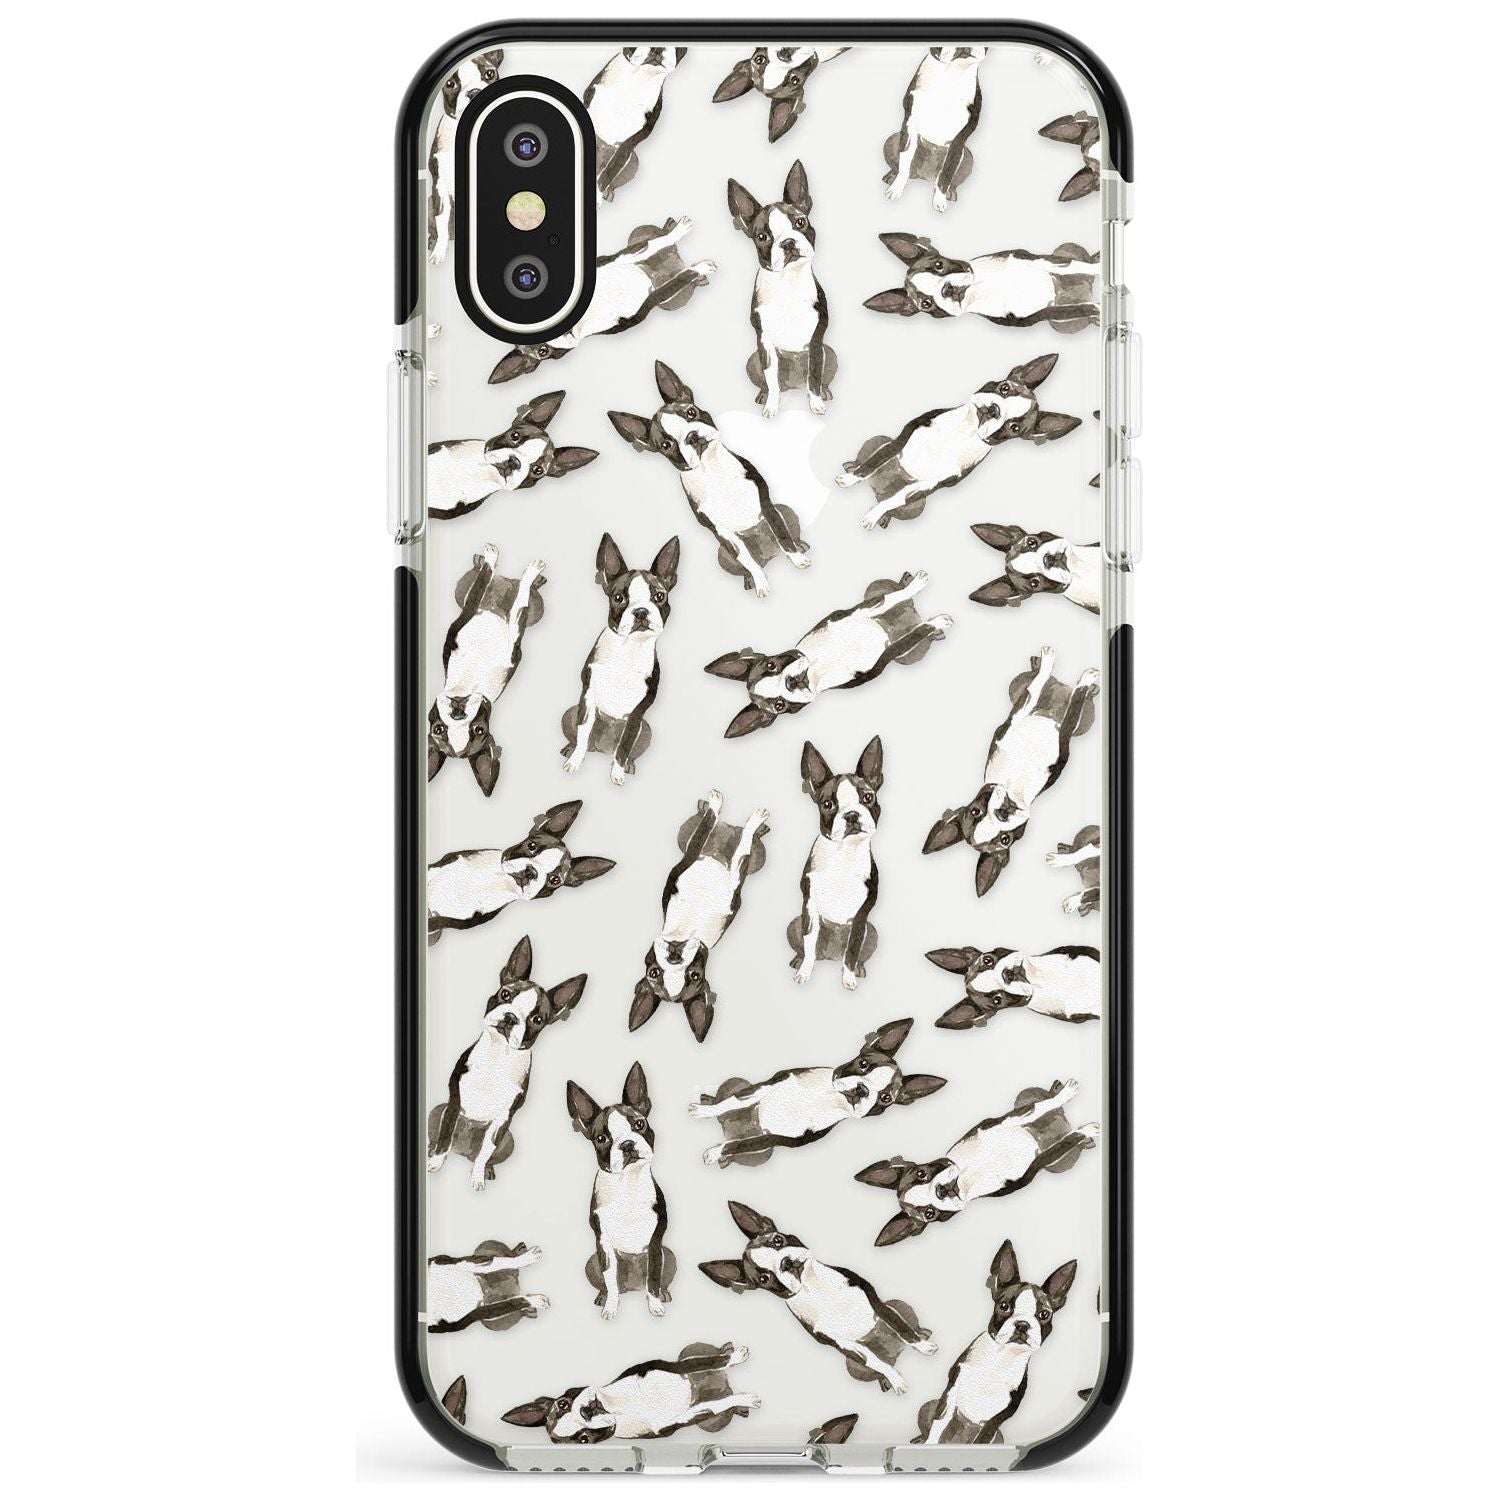 Boston Terrier Watercolour Dog Pattern Black Impact Phone Case for iPhone X XS Max XR